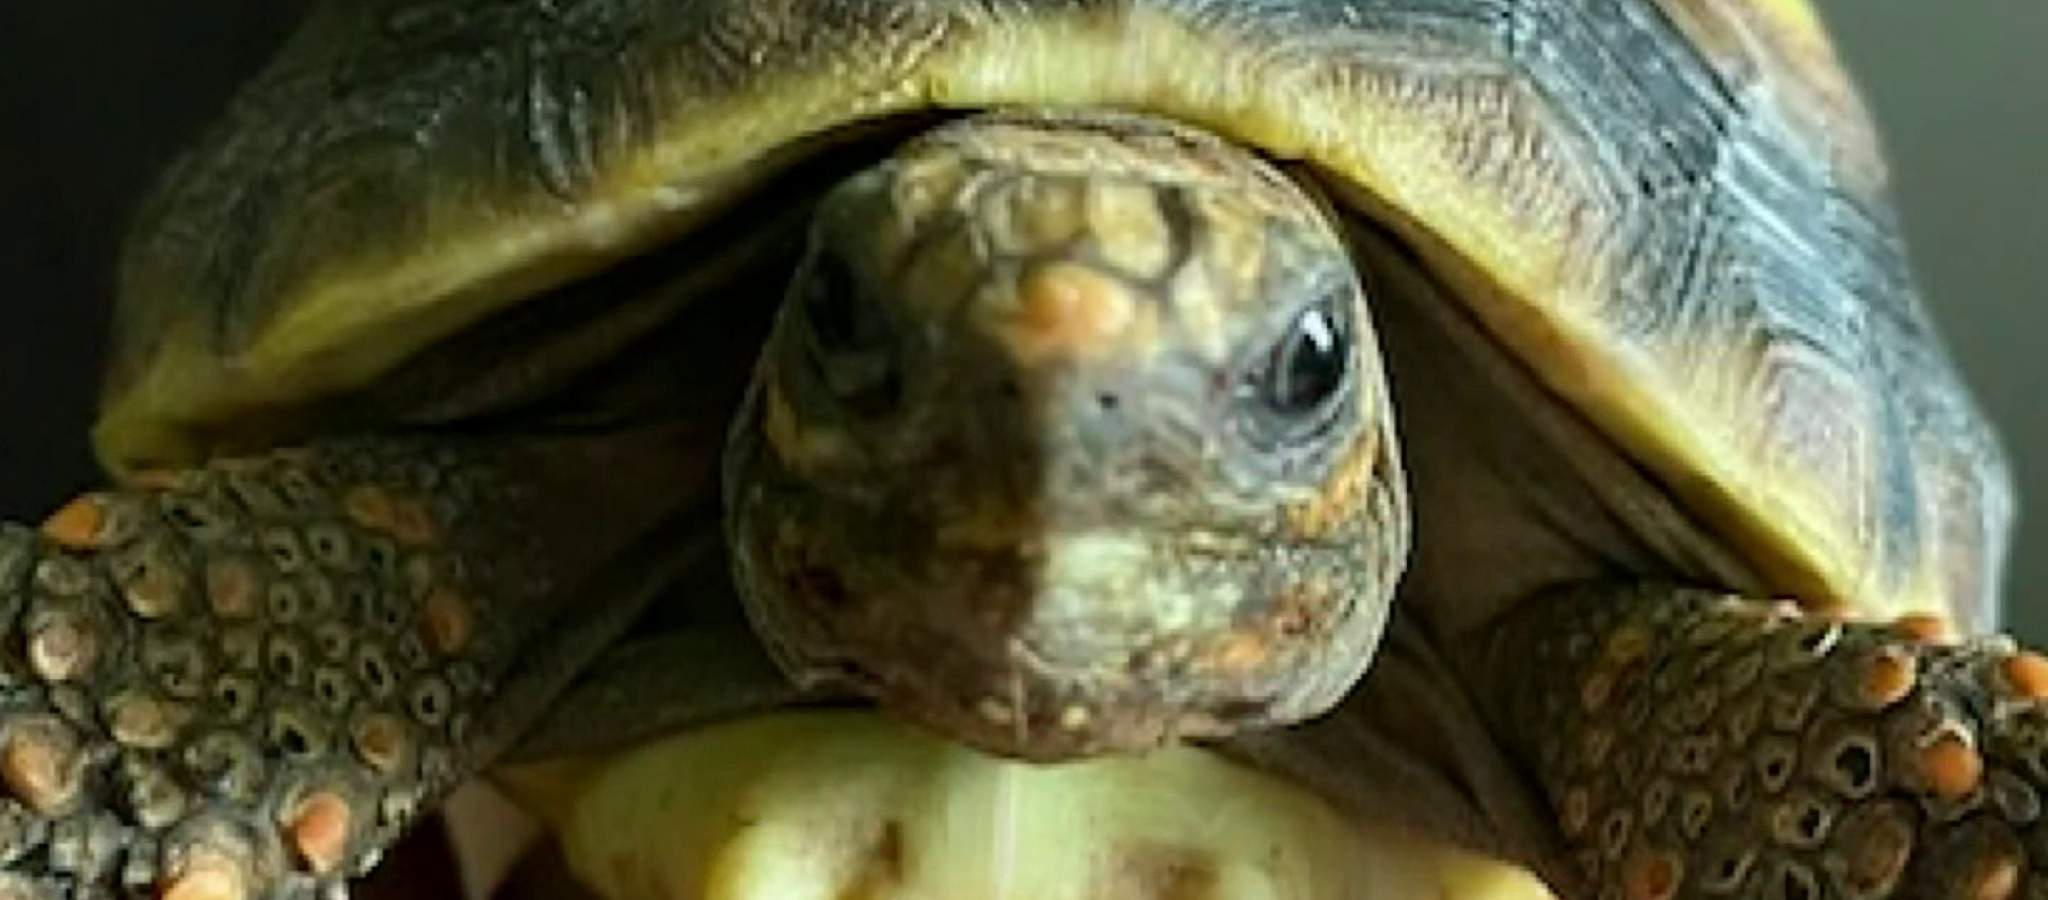 Family seeking answers after 9-year-old boy’s tortoise goes missing from Roseville pet store